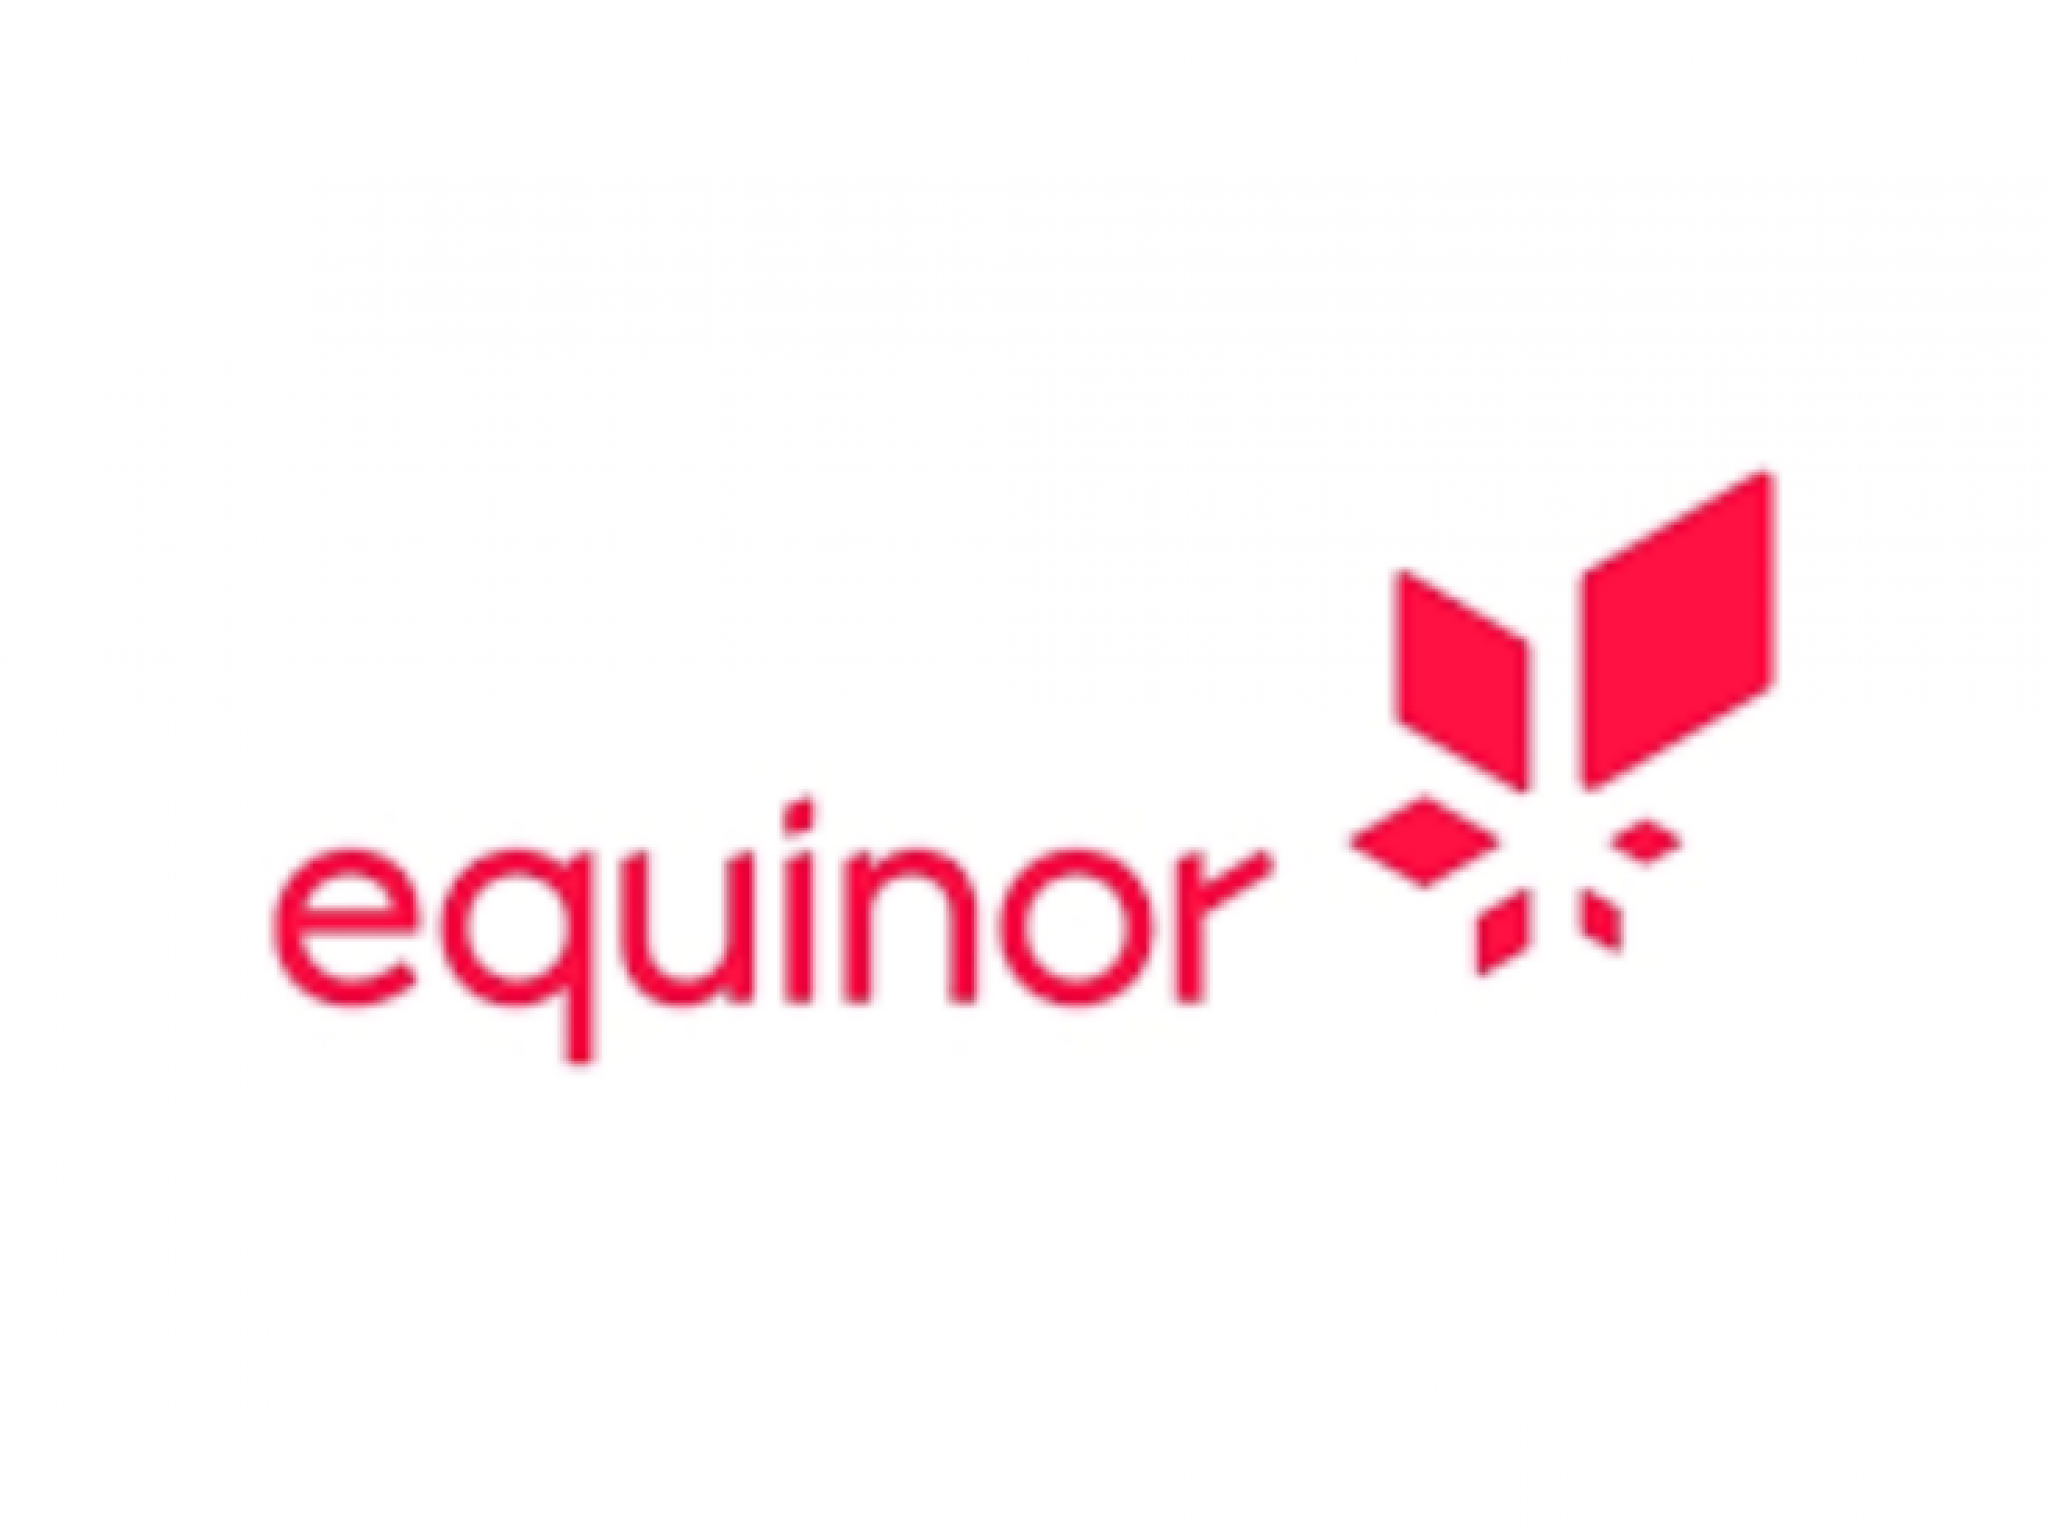  equinor-infuses-6b-annually-to-maintain-norways-oil-game-report 